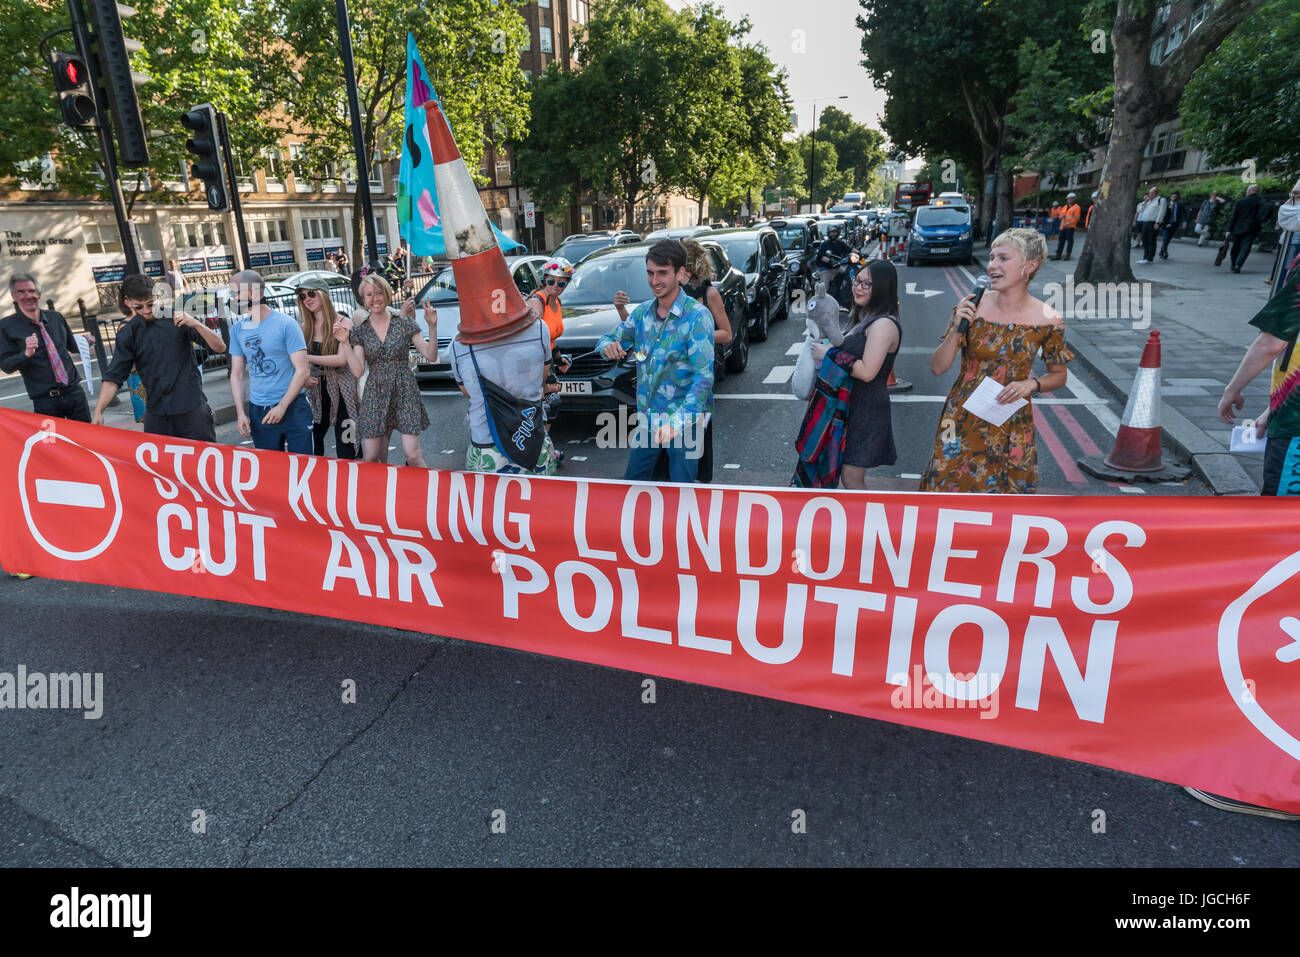 London, UK. 5th July 2017. Rising Up campaigners block the Marylebone Road with a banner reading 'Stop Killing Londoners - Cut Air Pollution' for their brief road-block disco on the east-bound carriageway near Baker St to raise awareness about the terribly high pollution levels on London streets caused largely by traffic. They walked onto a pedestrian crossing, raised a banner, spoke briefly about the problem and then danced, holding up notices to the blocked motorists apologising  for the protest but pointing out that urgent action was needed and the protest would be short. One Volvo driver g Stock Photo